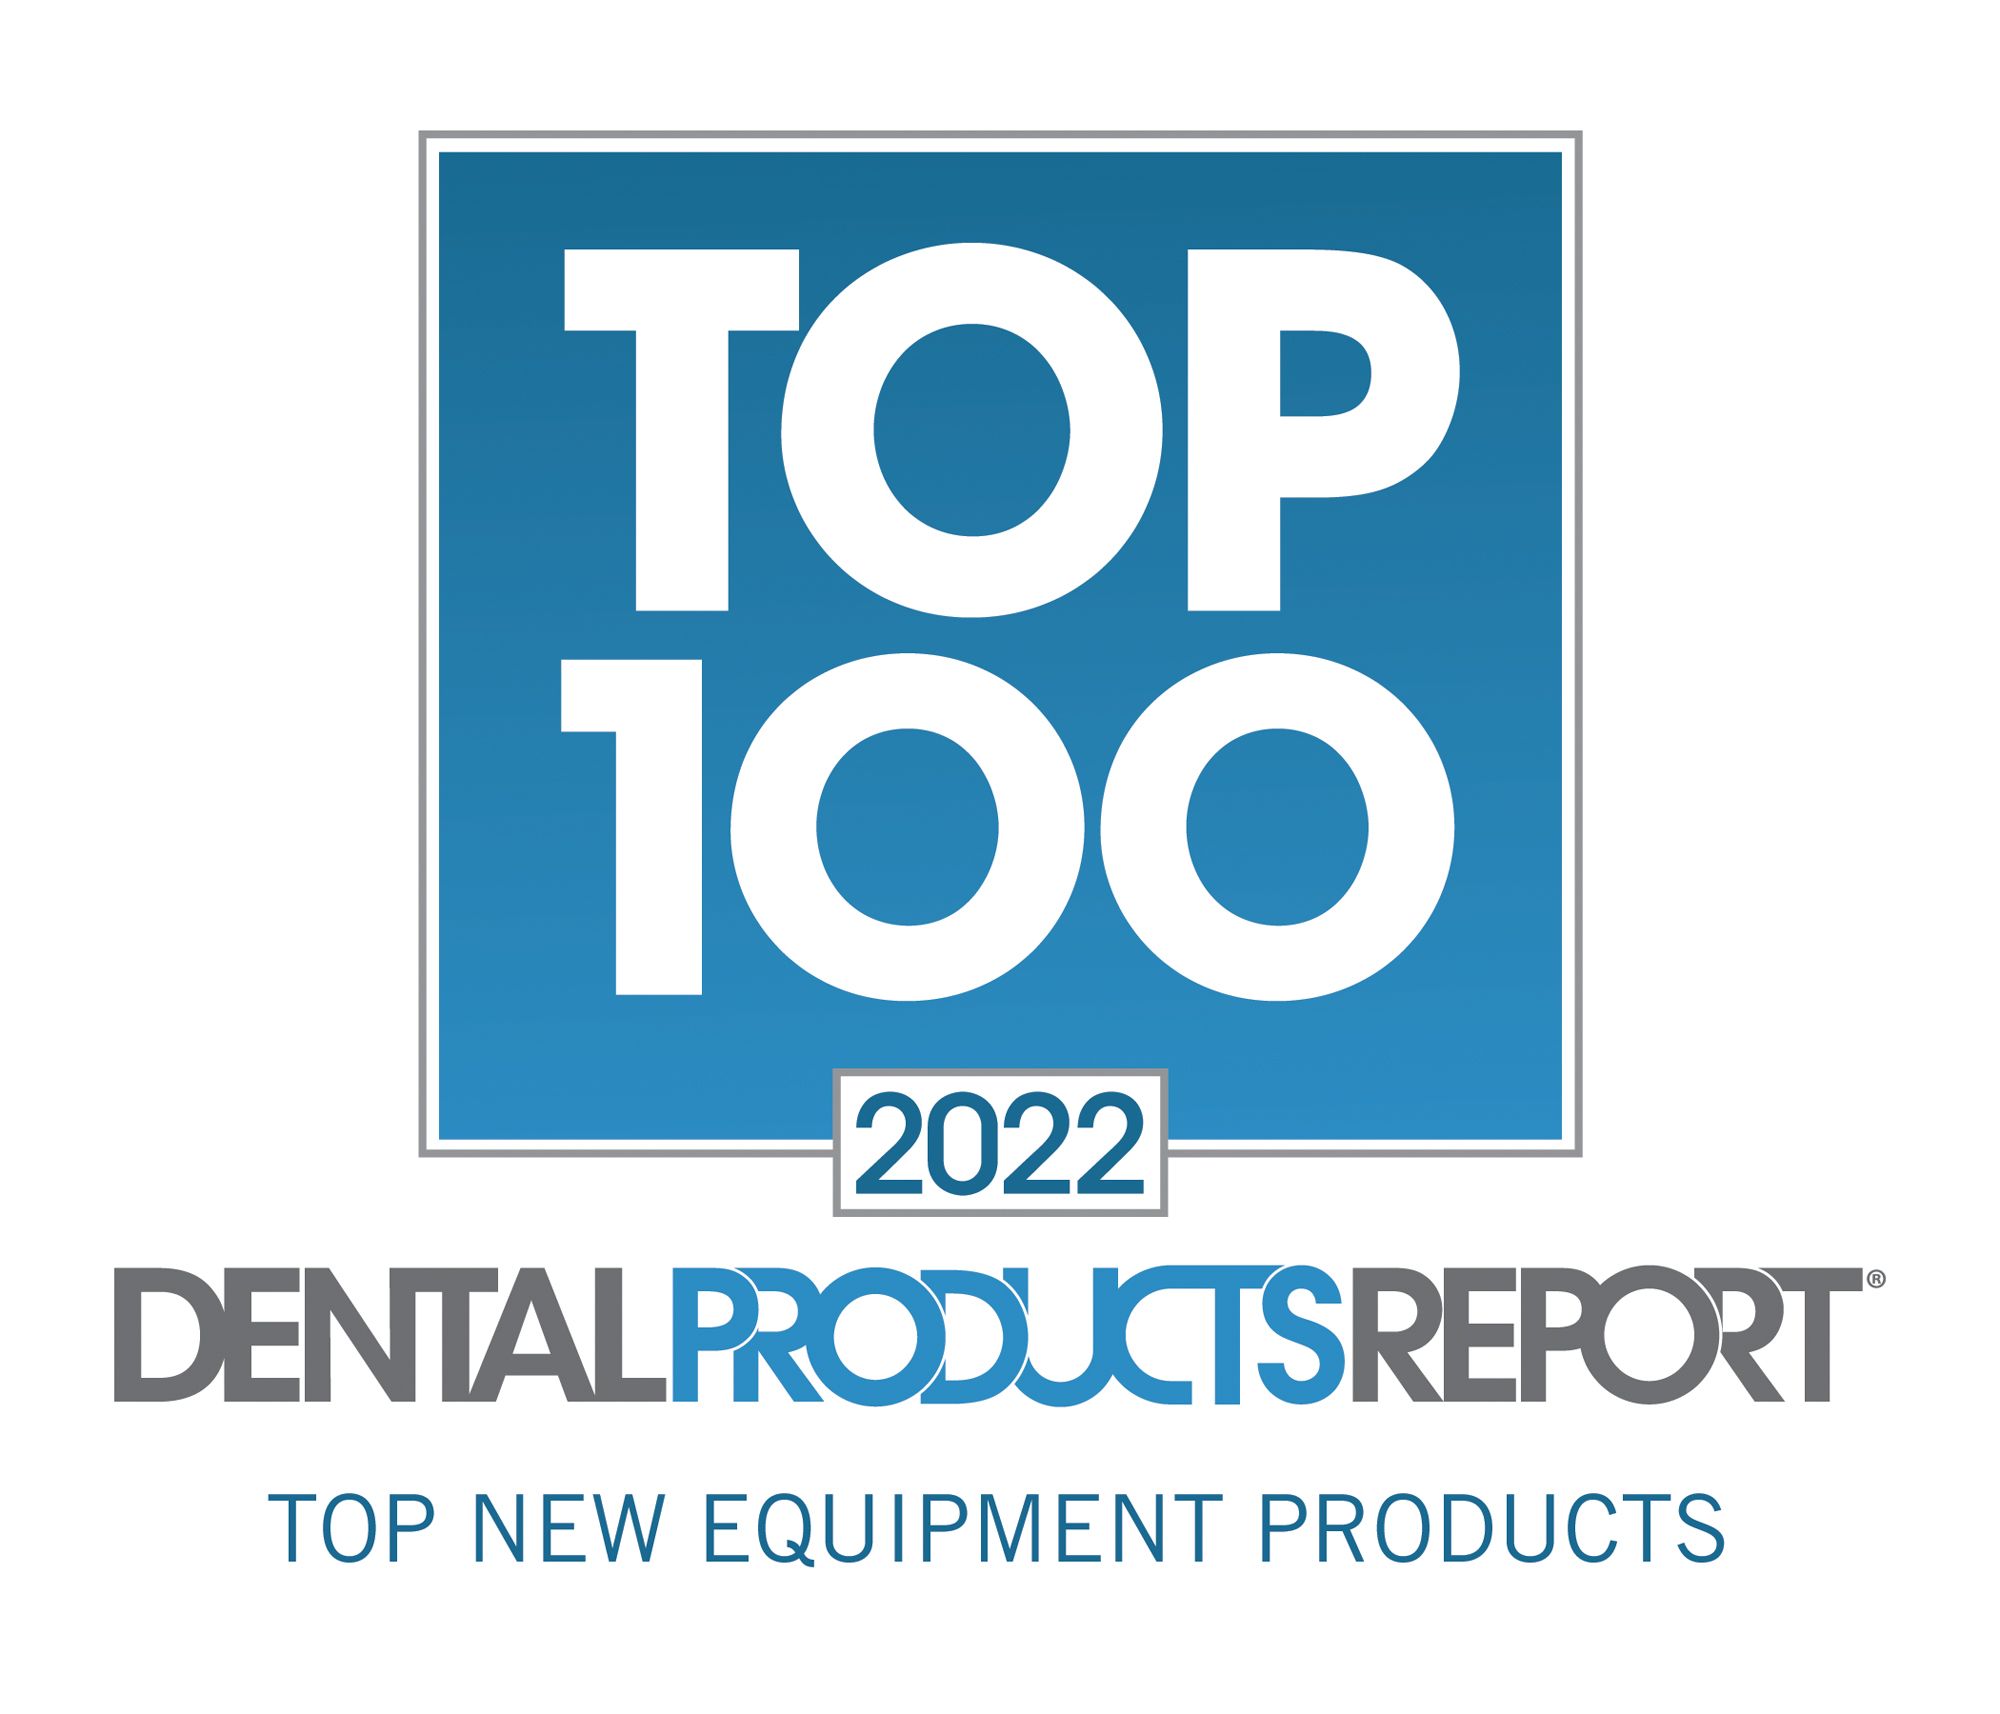 Top 10 Dental Equipment Products of 2022